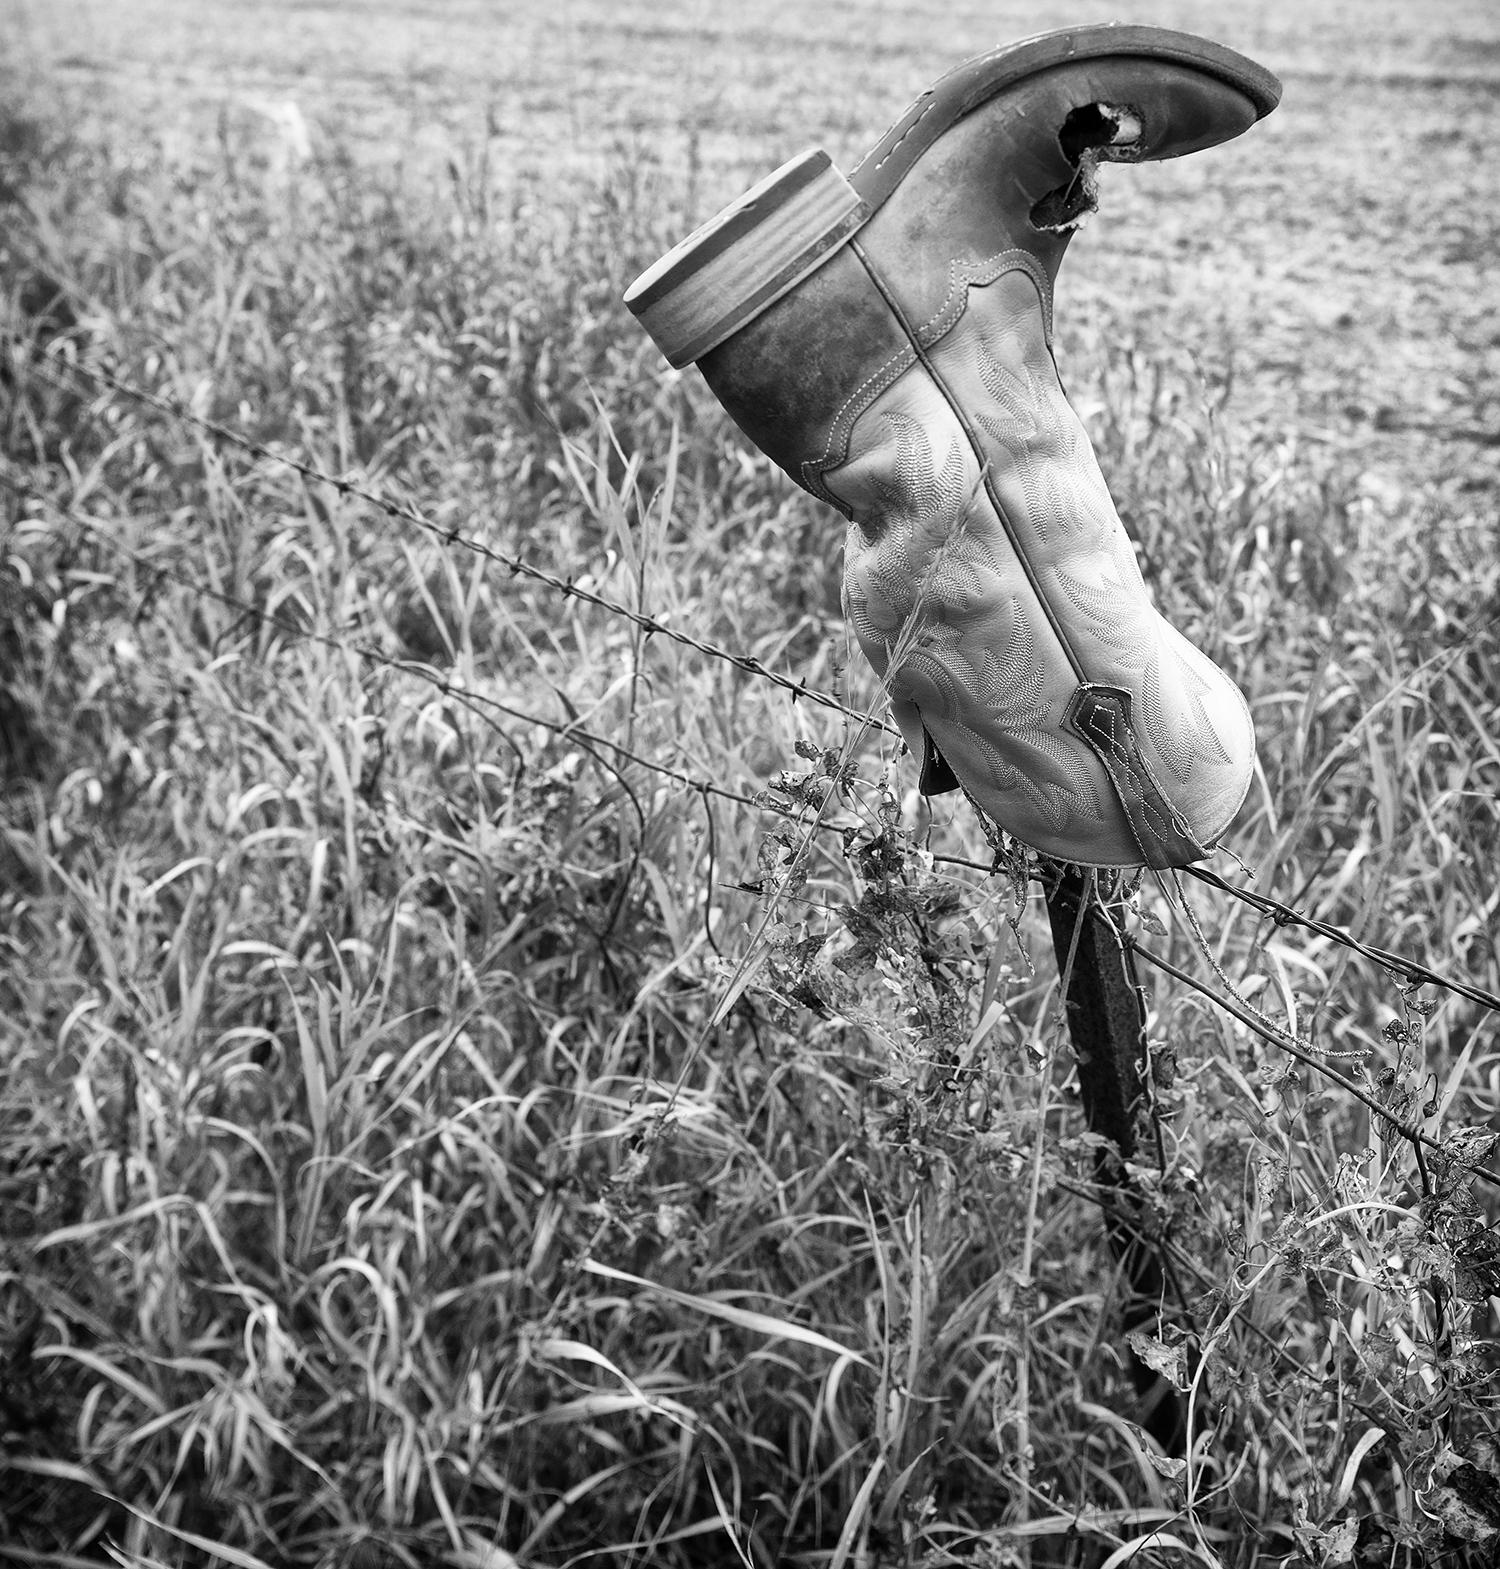 Rebecca Skinner’s “Sorrow” is a 24 x 16 inch contemporary black and white photograph of a weathered cowboy boot resting on a fence in the beautiful North Dakota landscape. The frameless metal print has a satin finish and is infused directly into